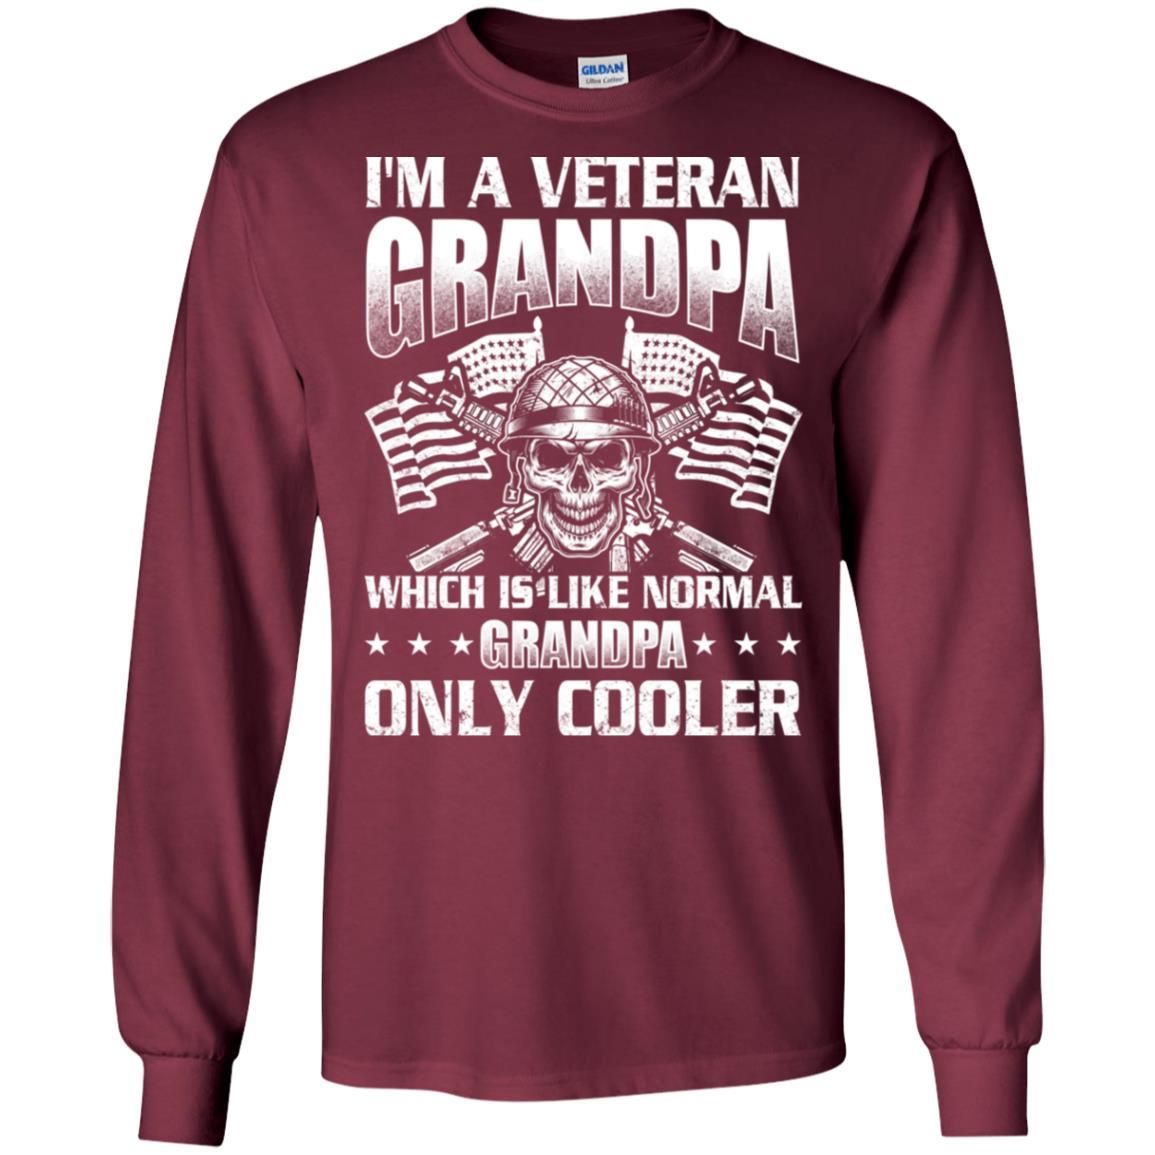 Military T-Shirt "I'm A Veteran Grandpa Which Is Like Normal Grandpa Only Cooler On" Front-TShirt-General-Veterans Nation